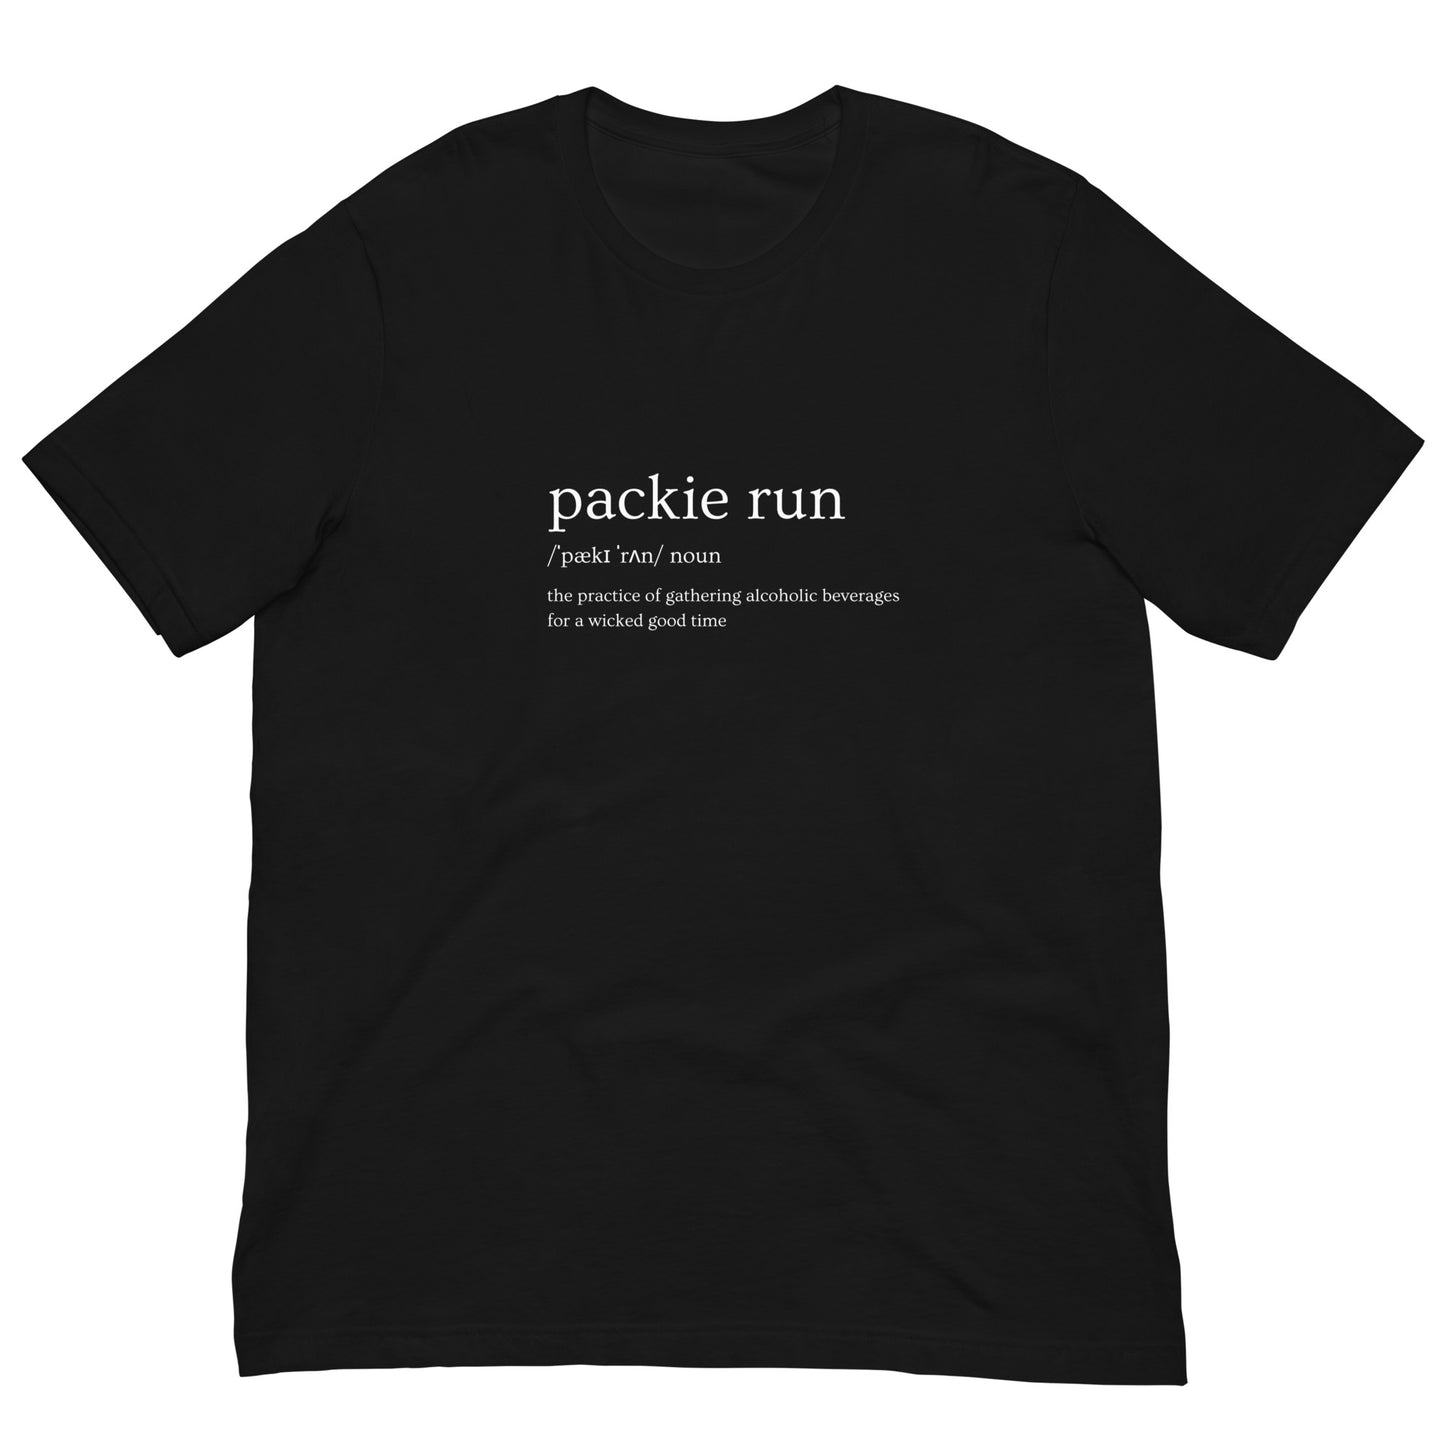 black tshirt that says "packie run, noun, the practice of gathering alcoholic beverages for a wicked good time"